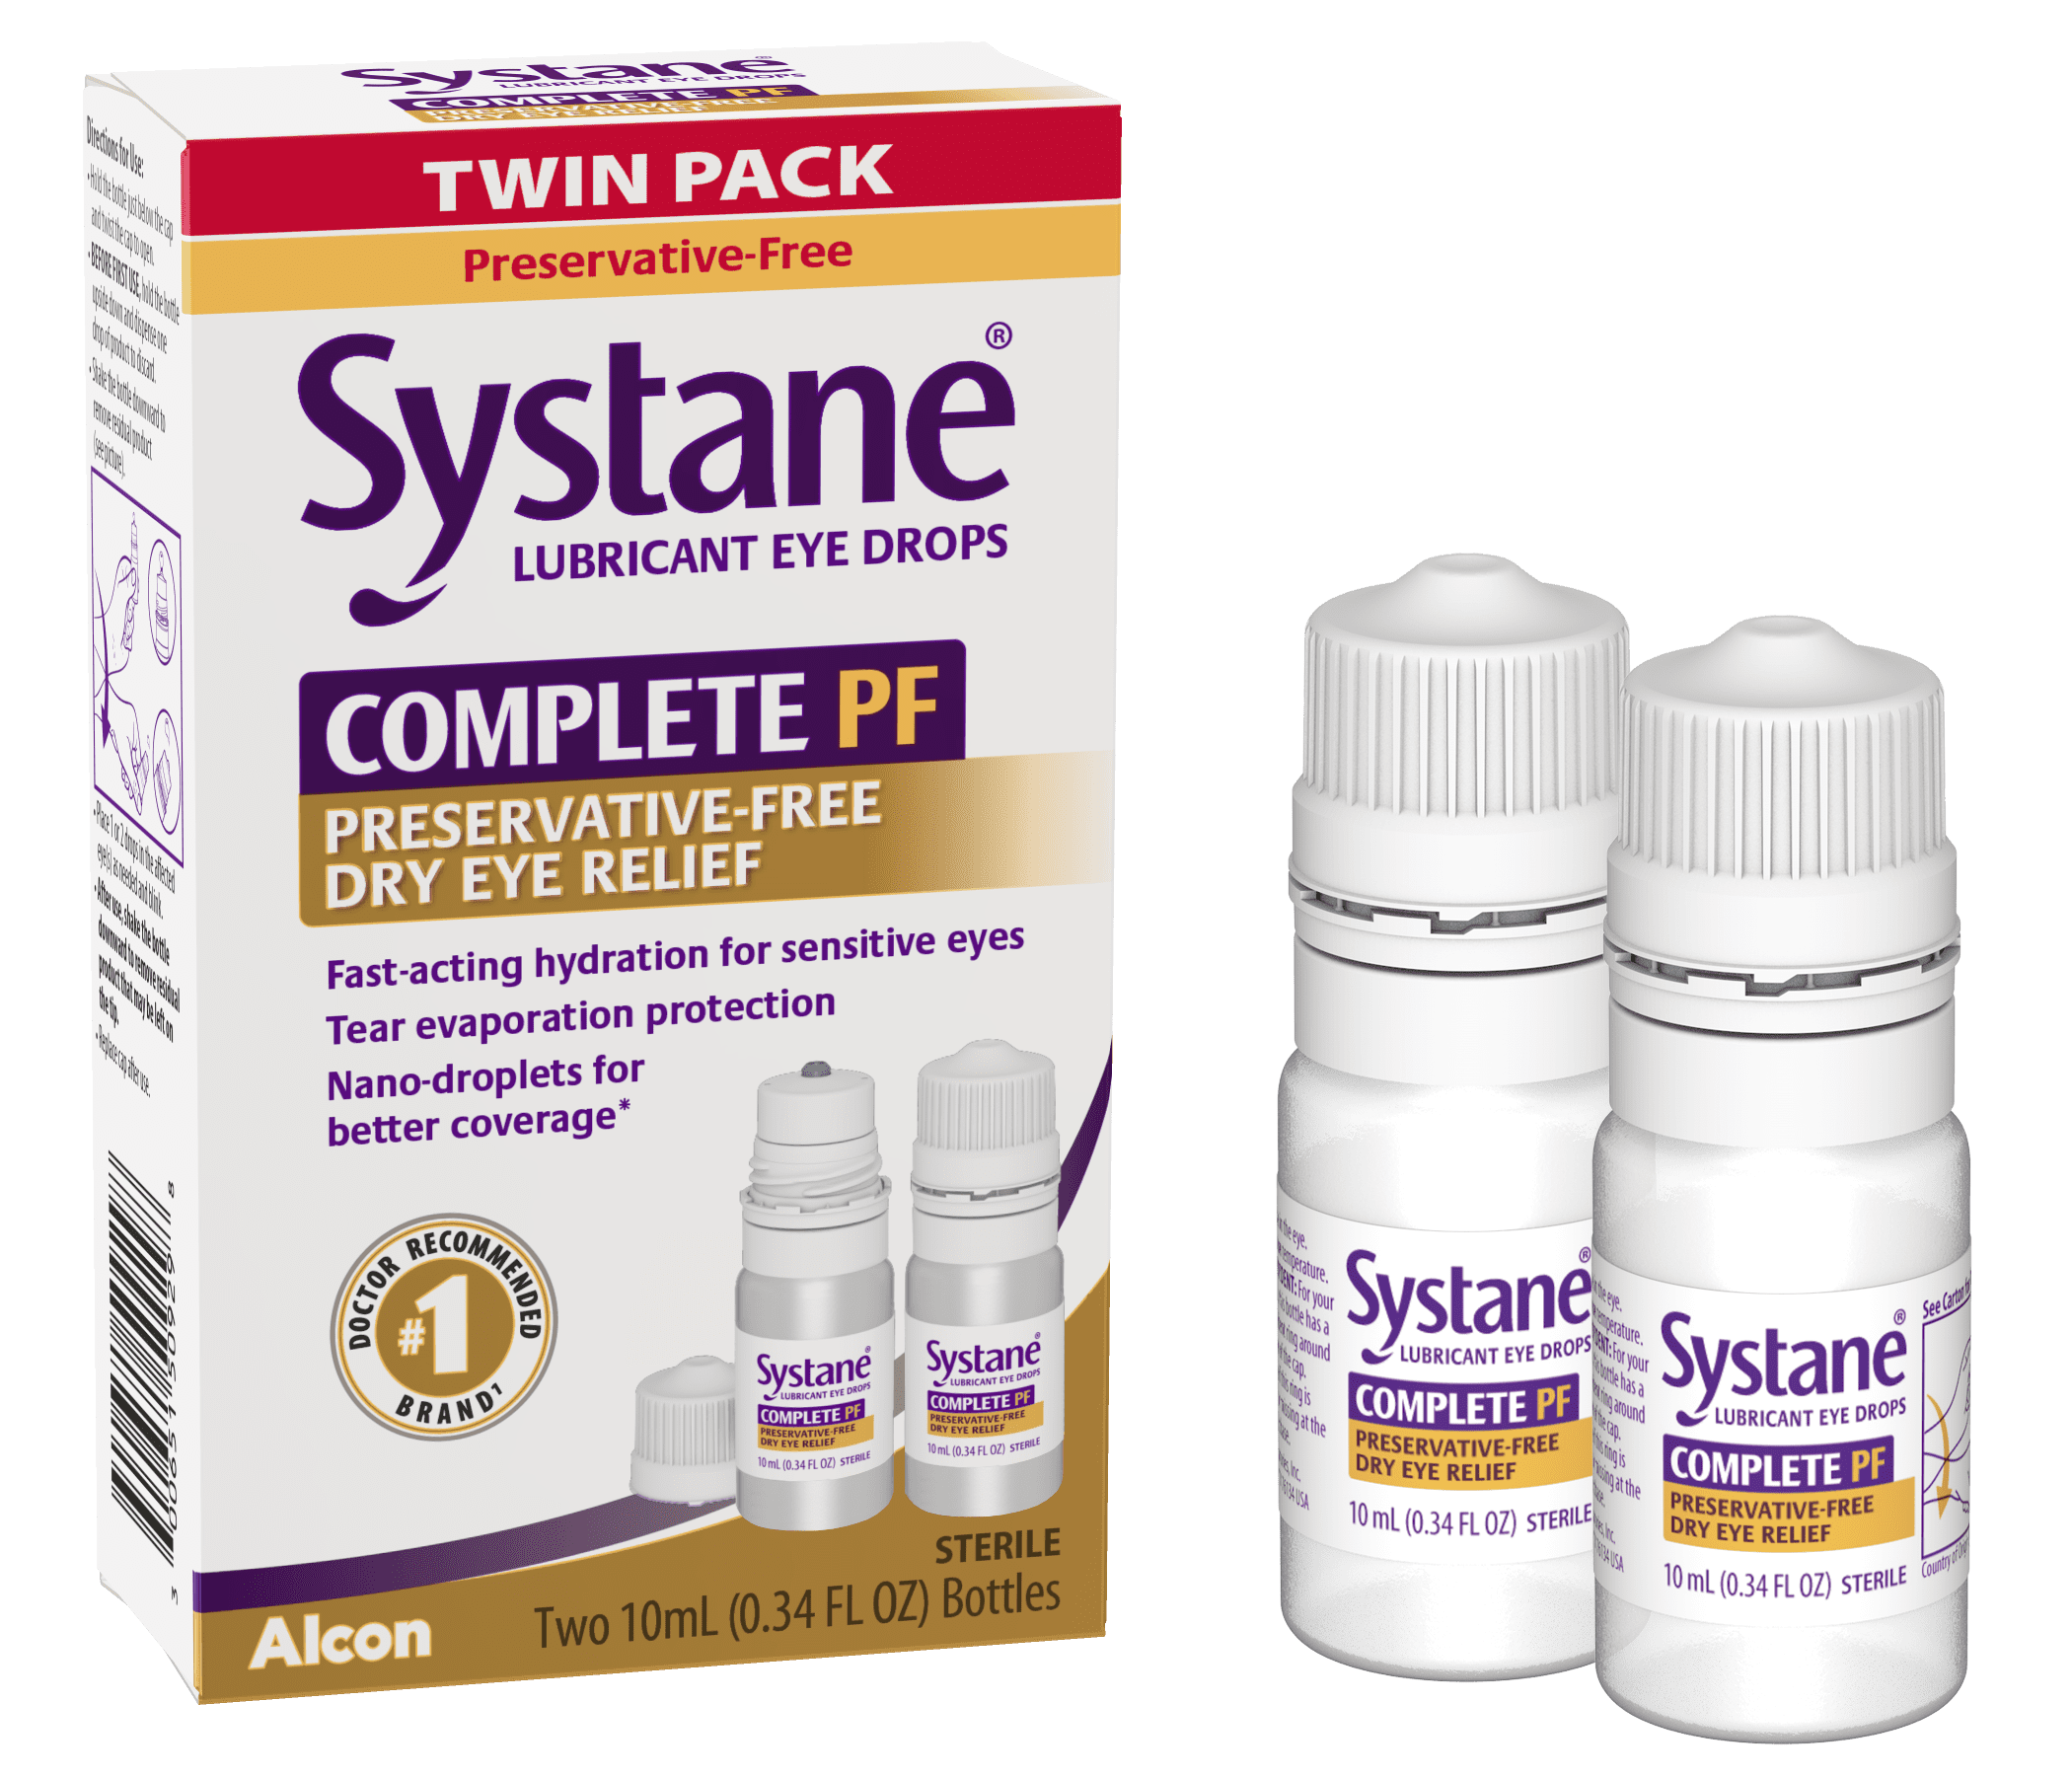 systane-complete-preservative-free-lubricant-eye-drops-twin-pack